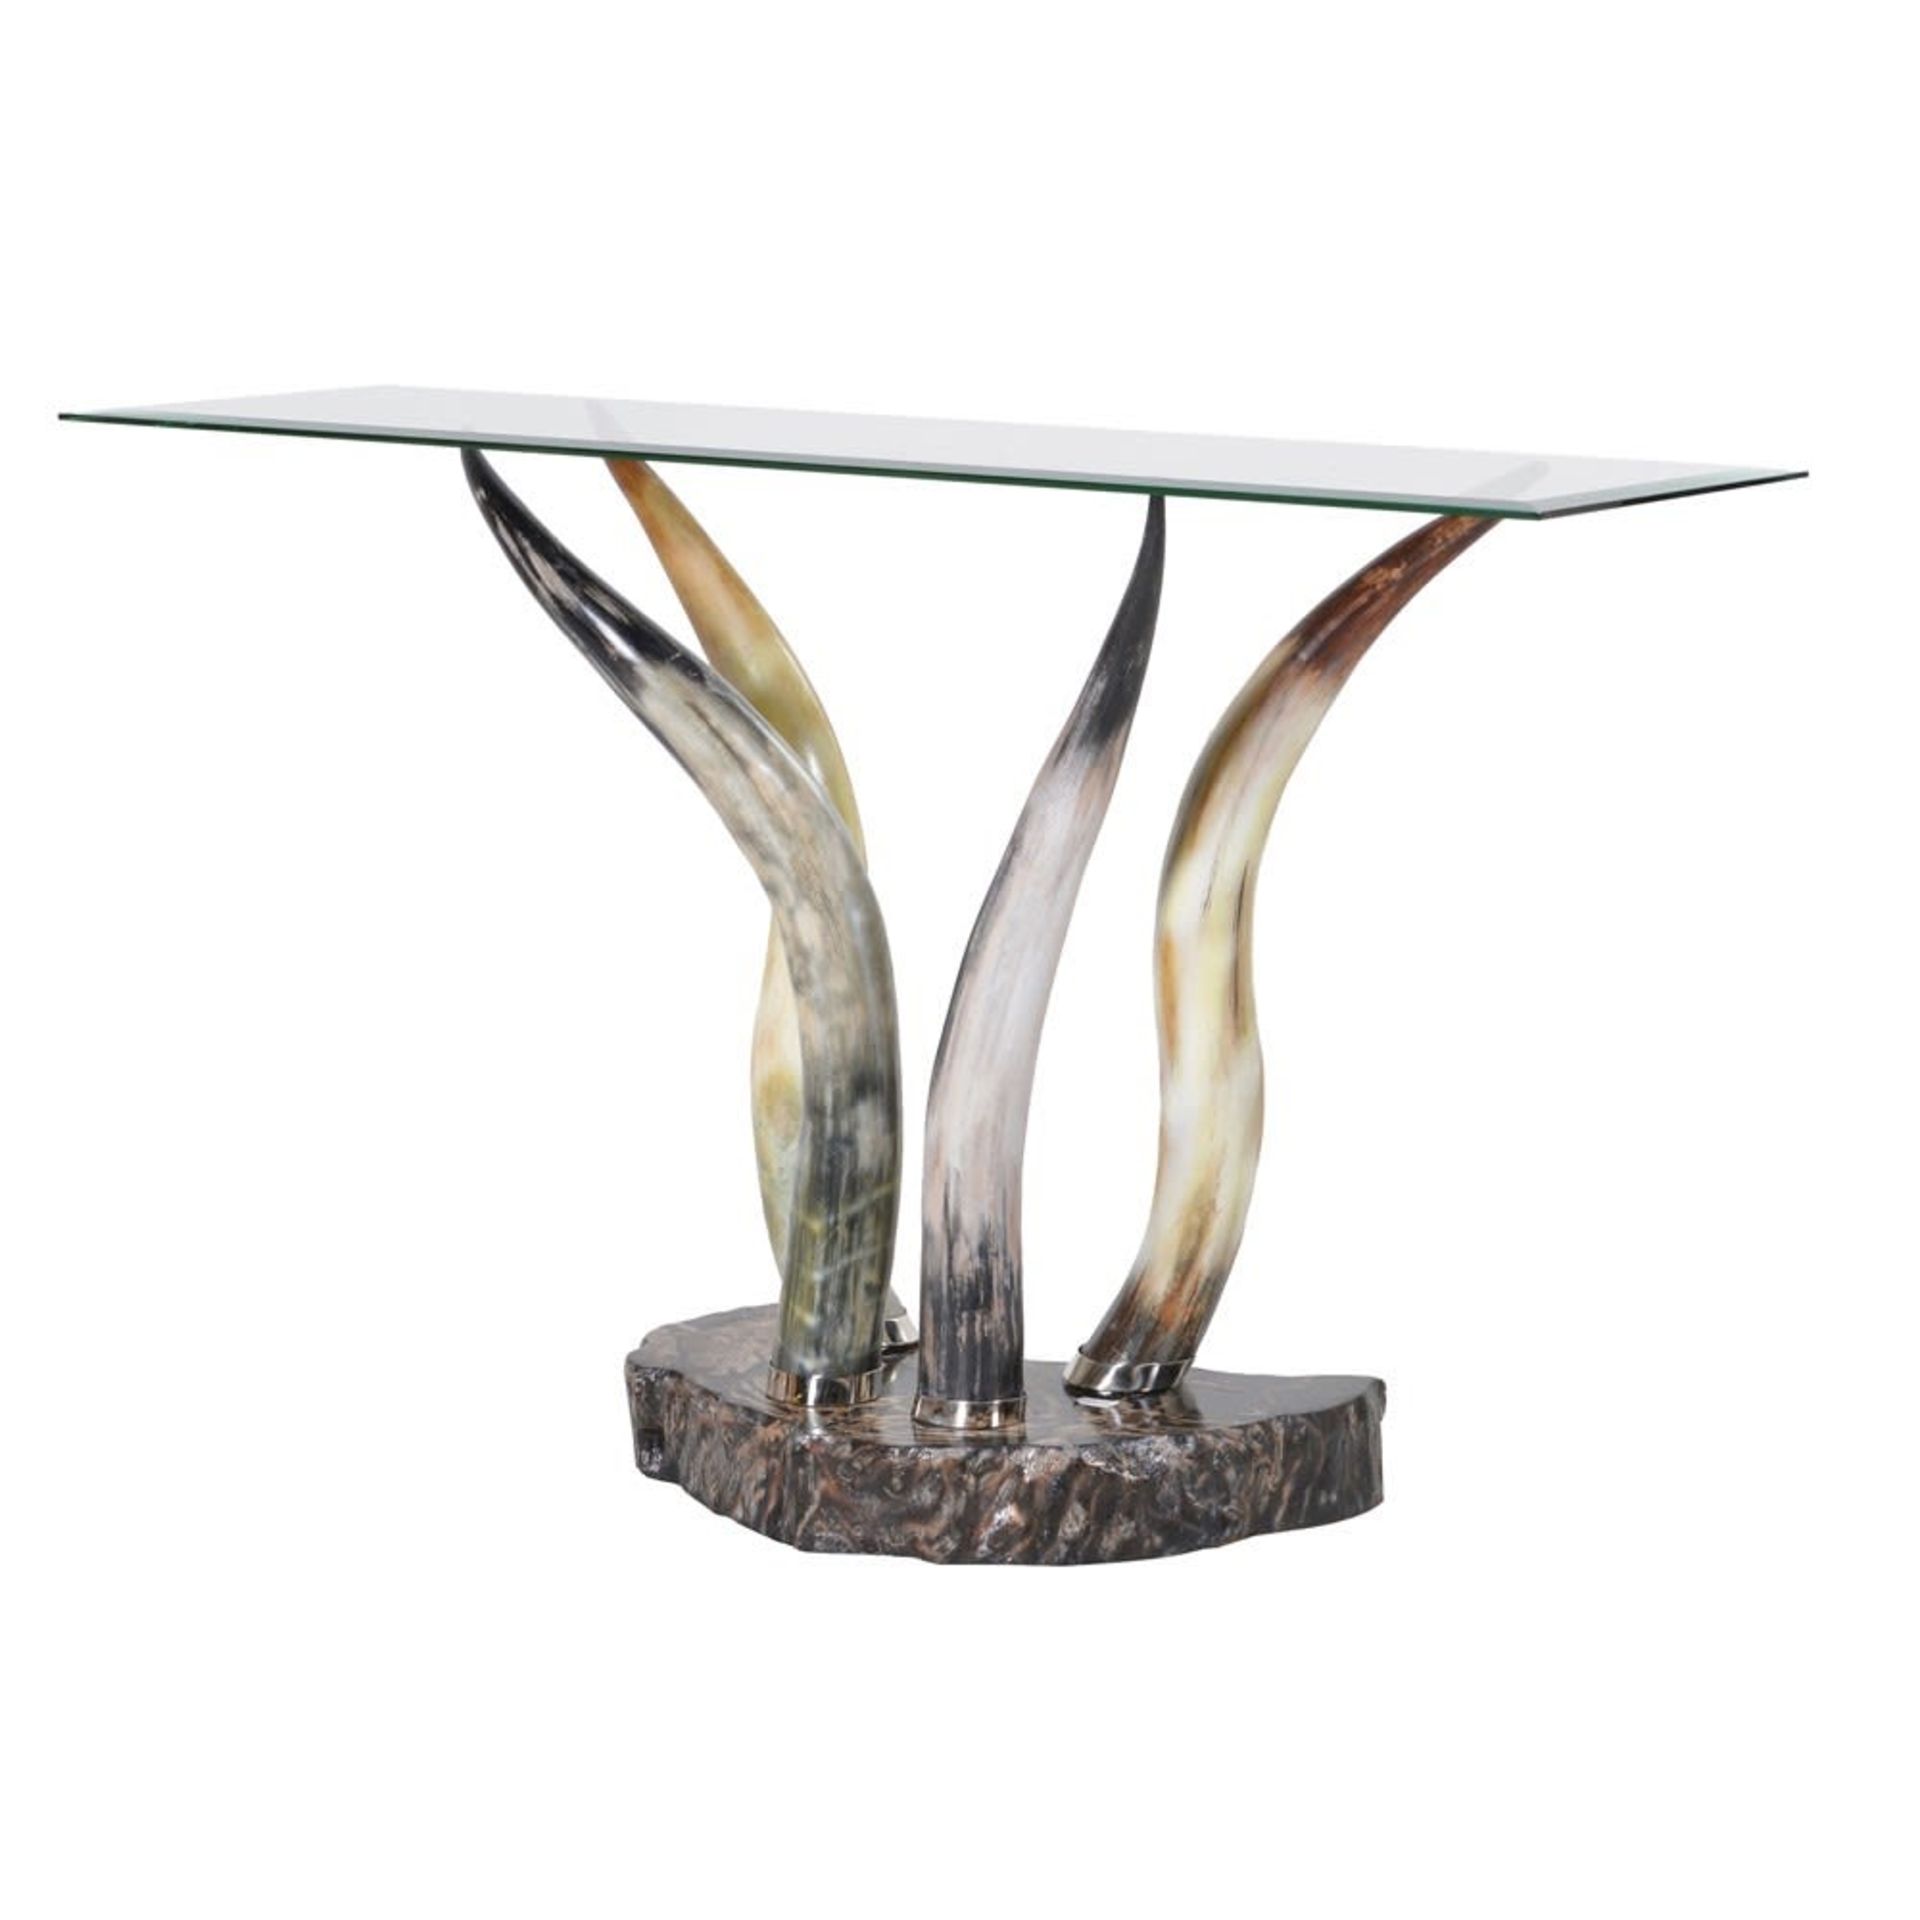 1 x Horn Console Hall Table - Features Painted Carved Horn Legs - RRP £955 - NO VAT ON THE HAMMER! - Image 2 of 16